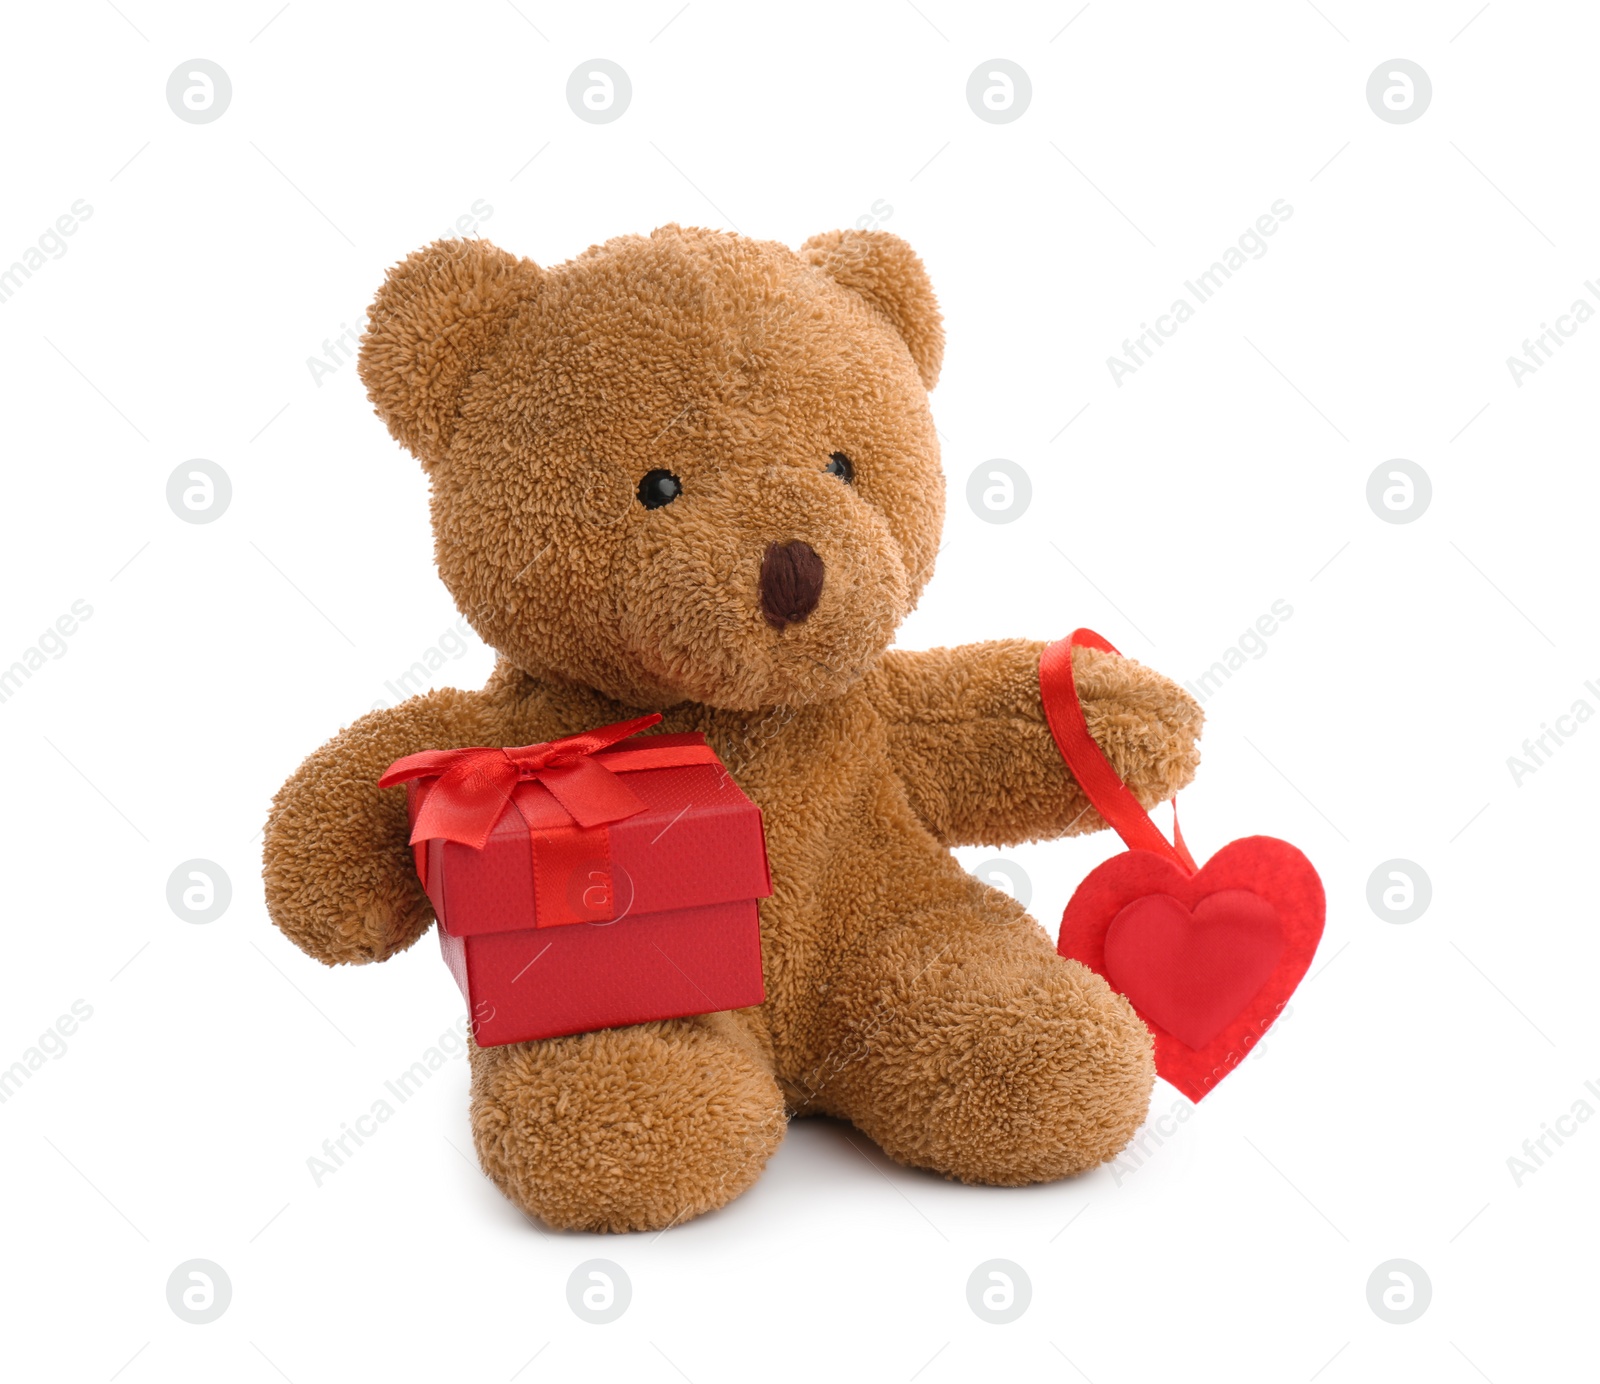 Photo of Cute teddy bear with red heart and gift box on white background. Valentine's day celebration